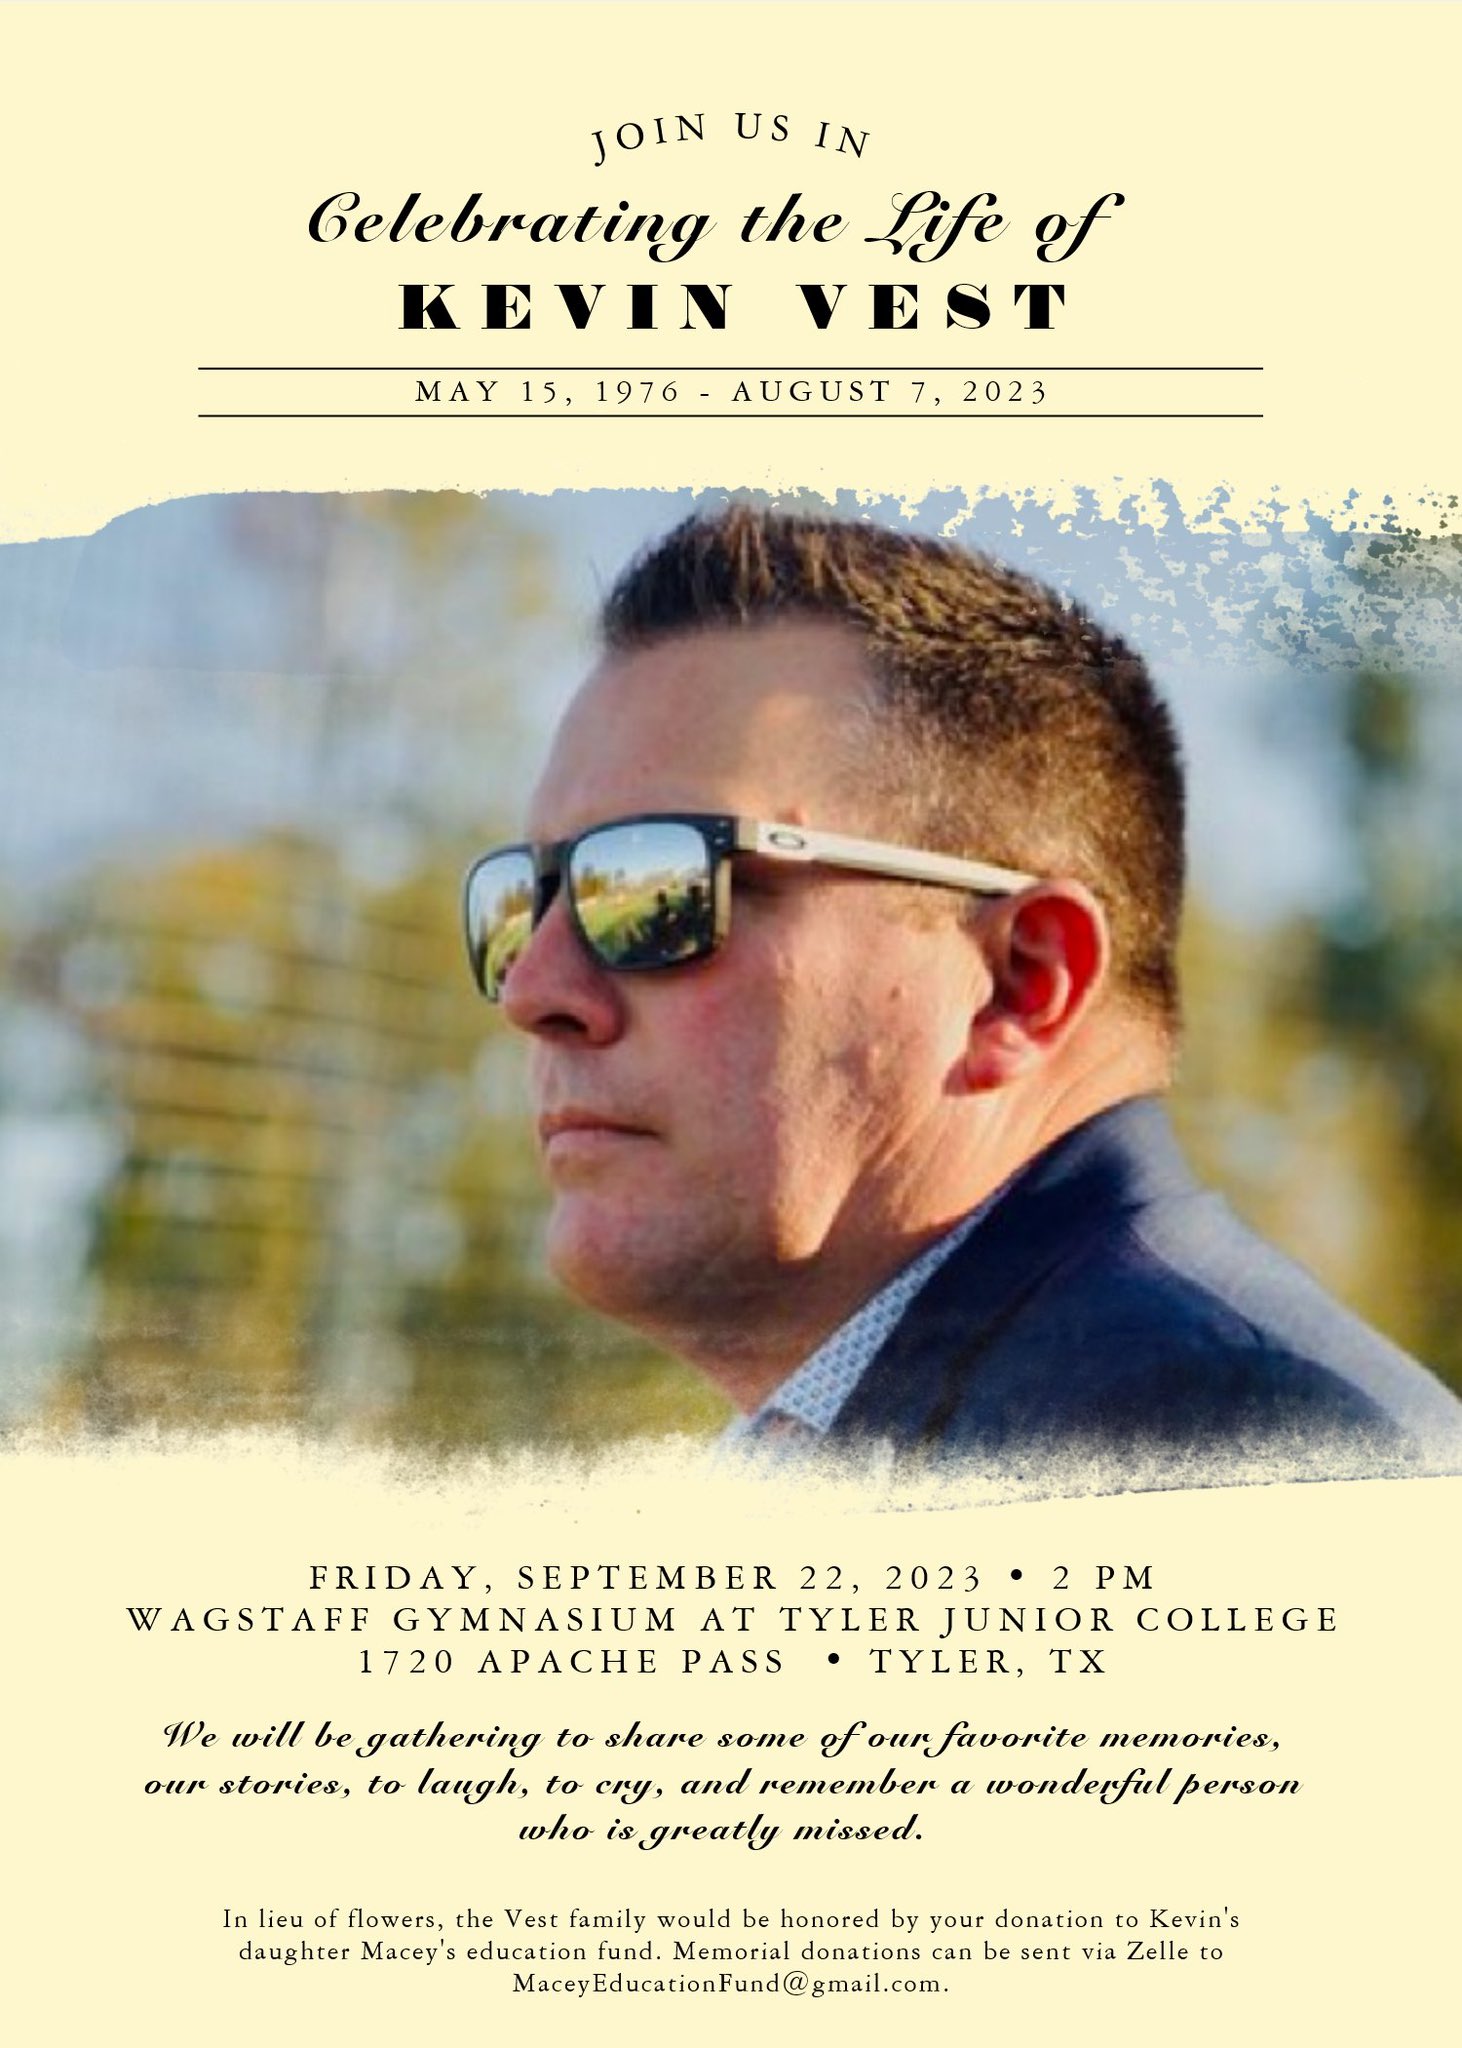 Celebrating the Life of Kevin Vest. Friday • Sept 22 • 2pm • Wagstaff Gymnasium